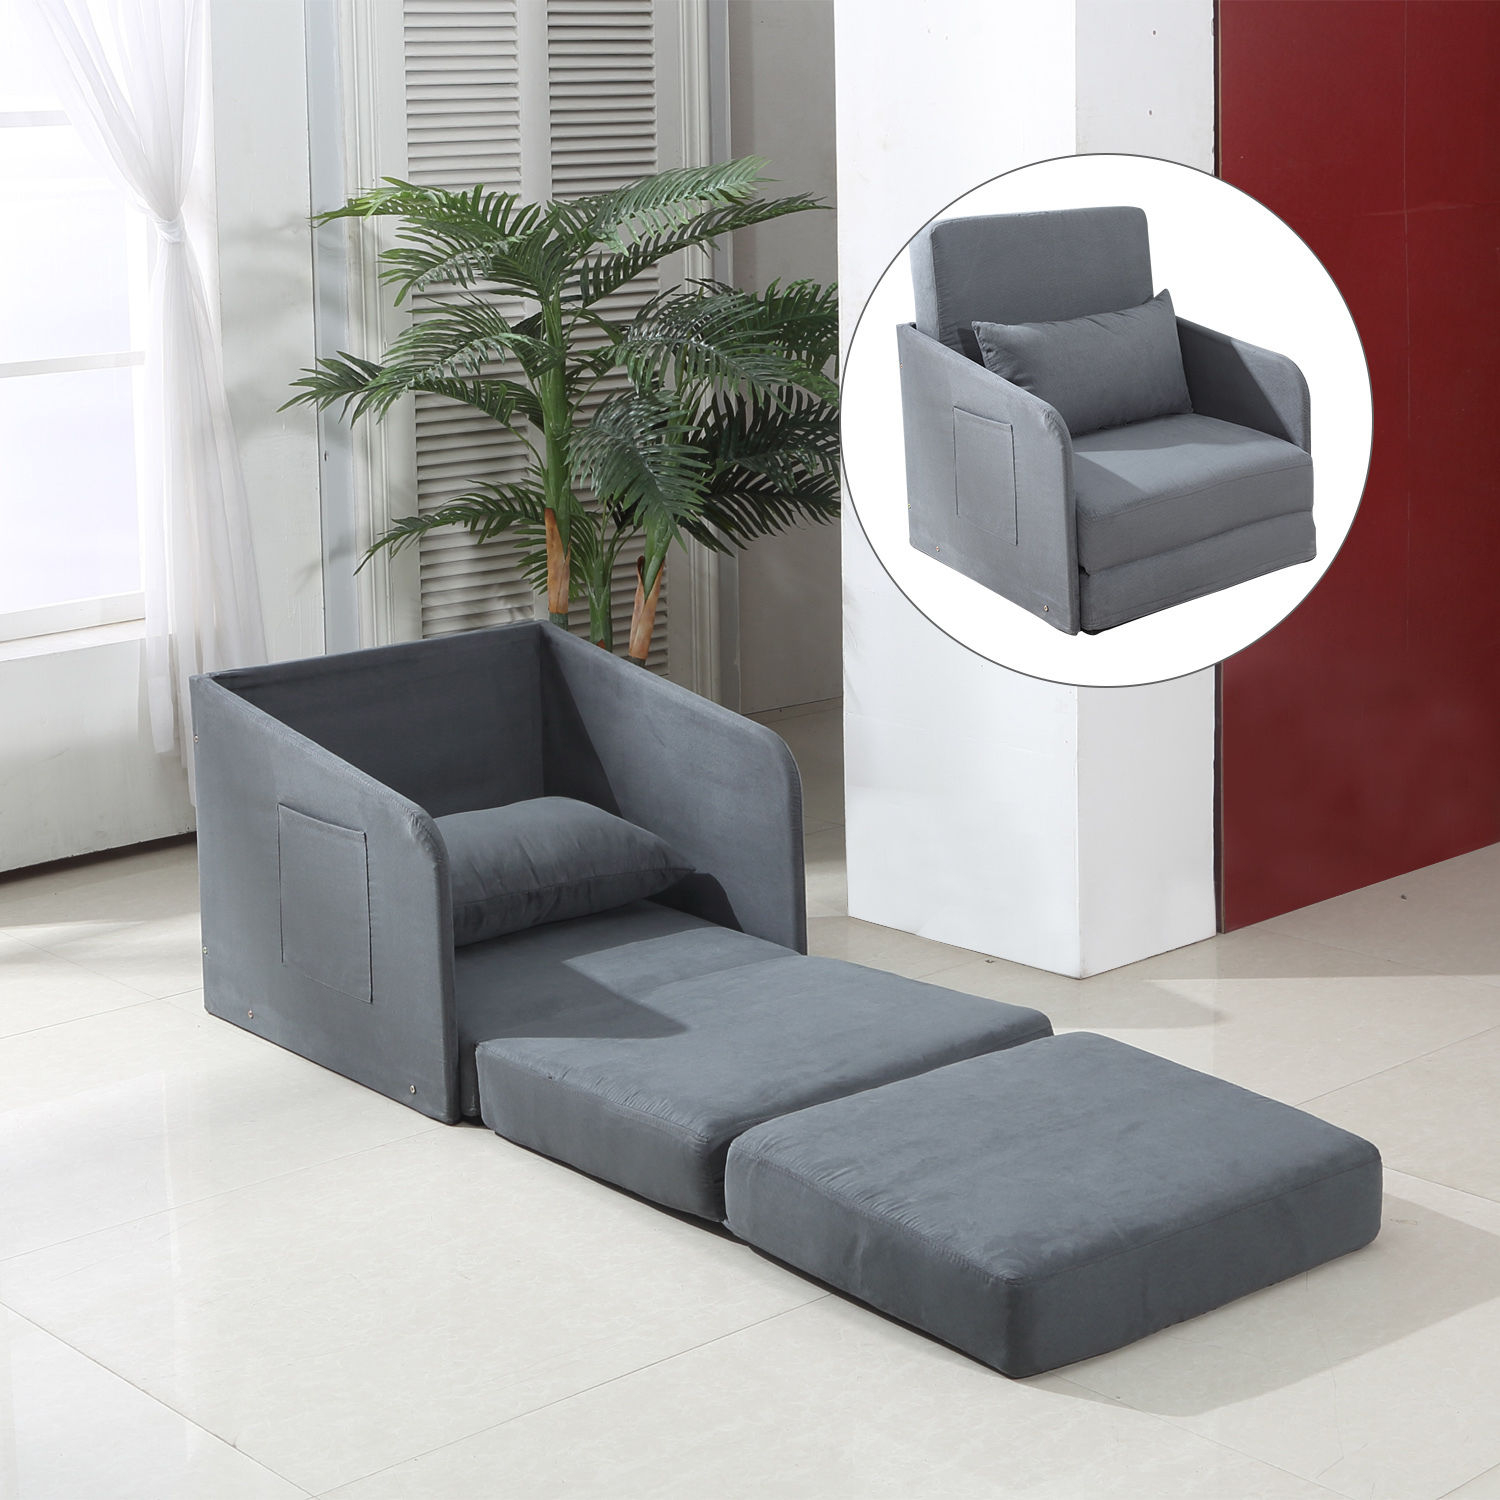 Single Sofa Bed Chair Visualhunt, Single Convertible Chair Bed